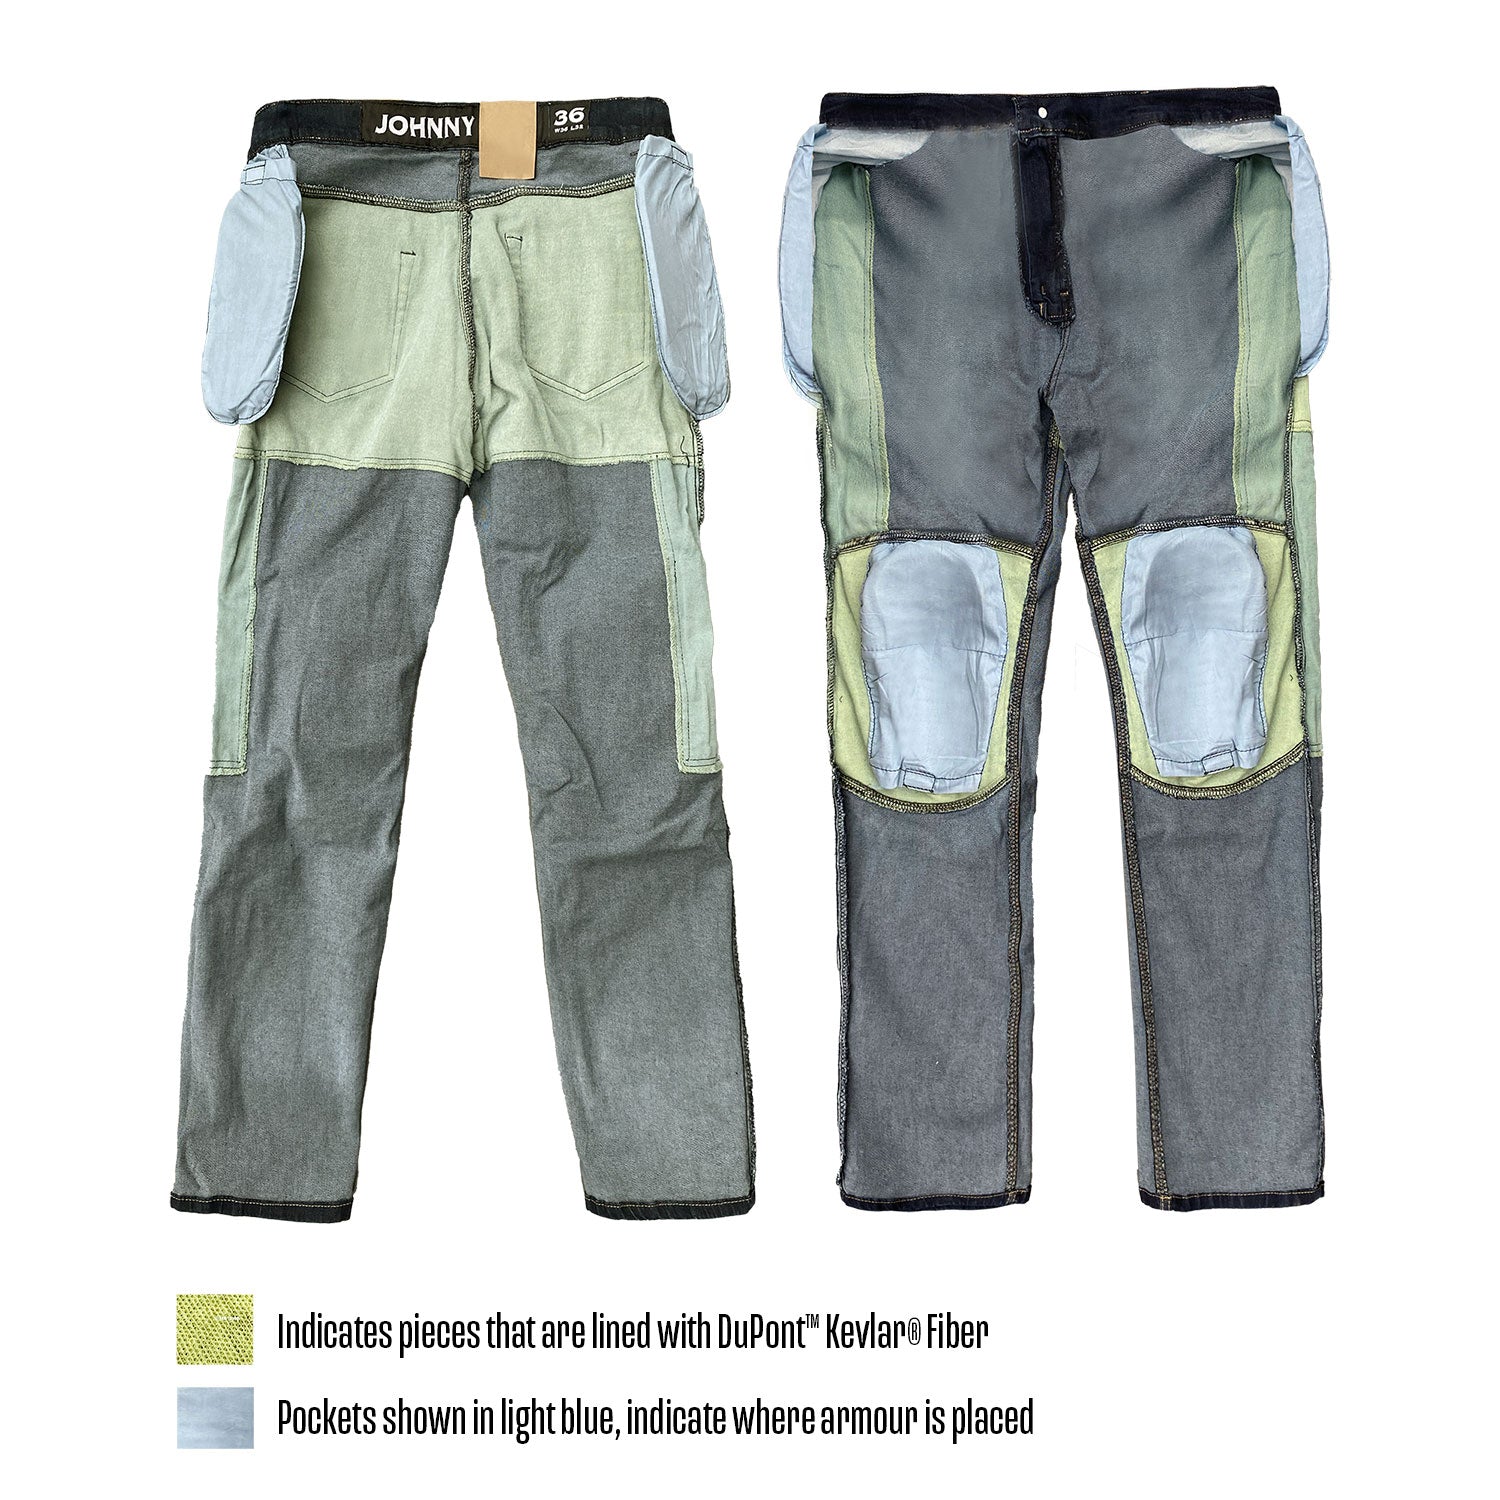 Men's Hume Protective Jeans